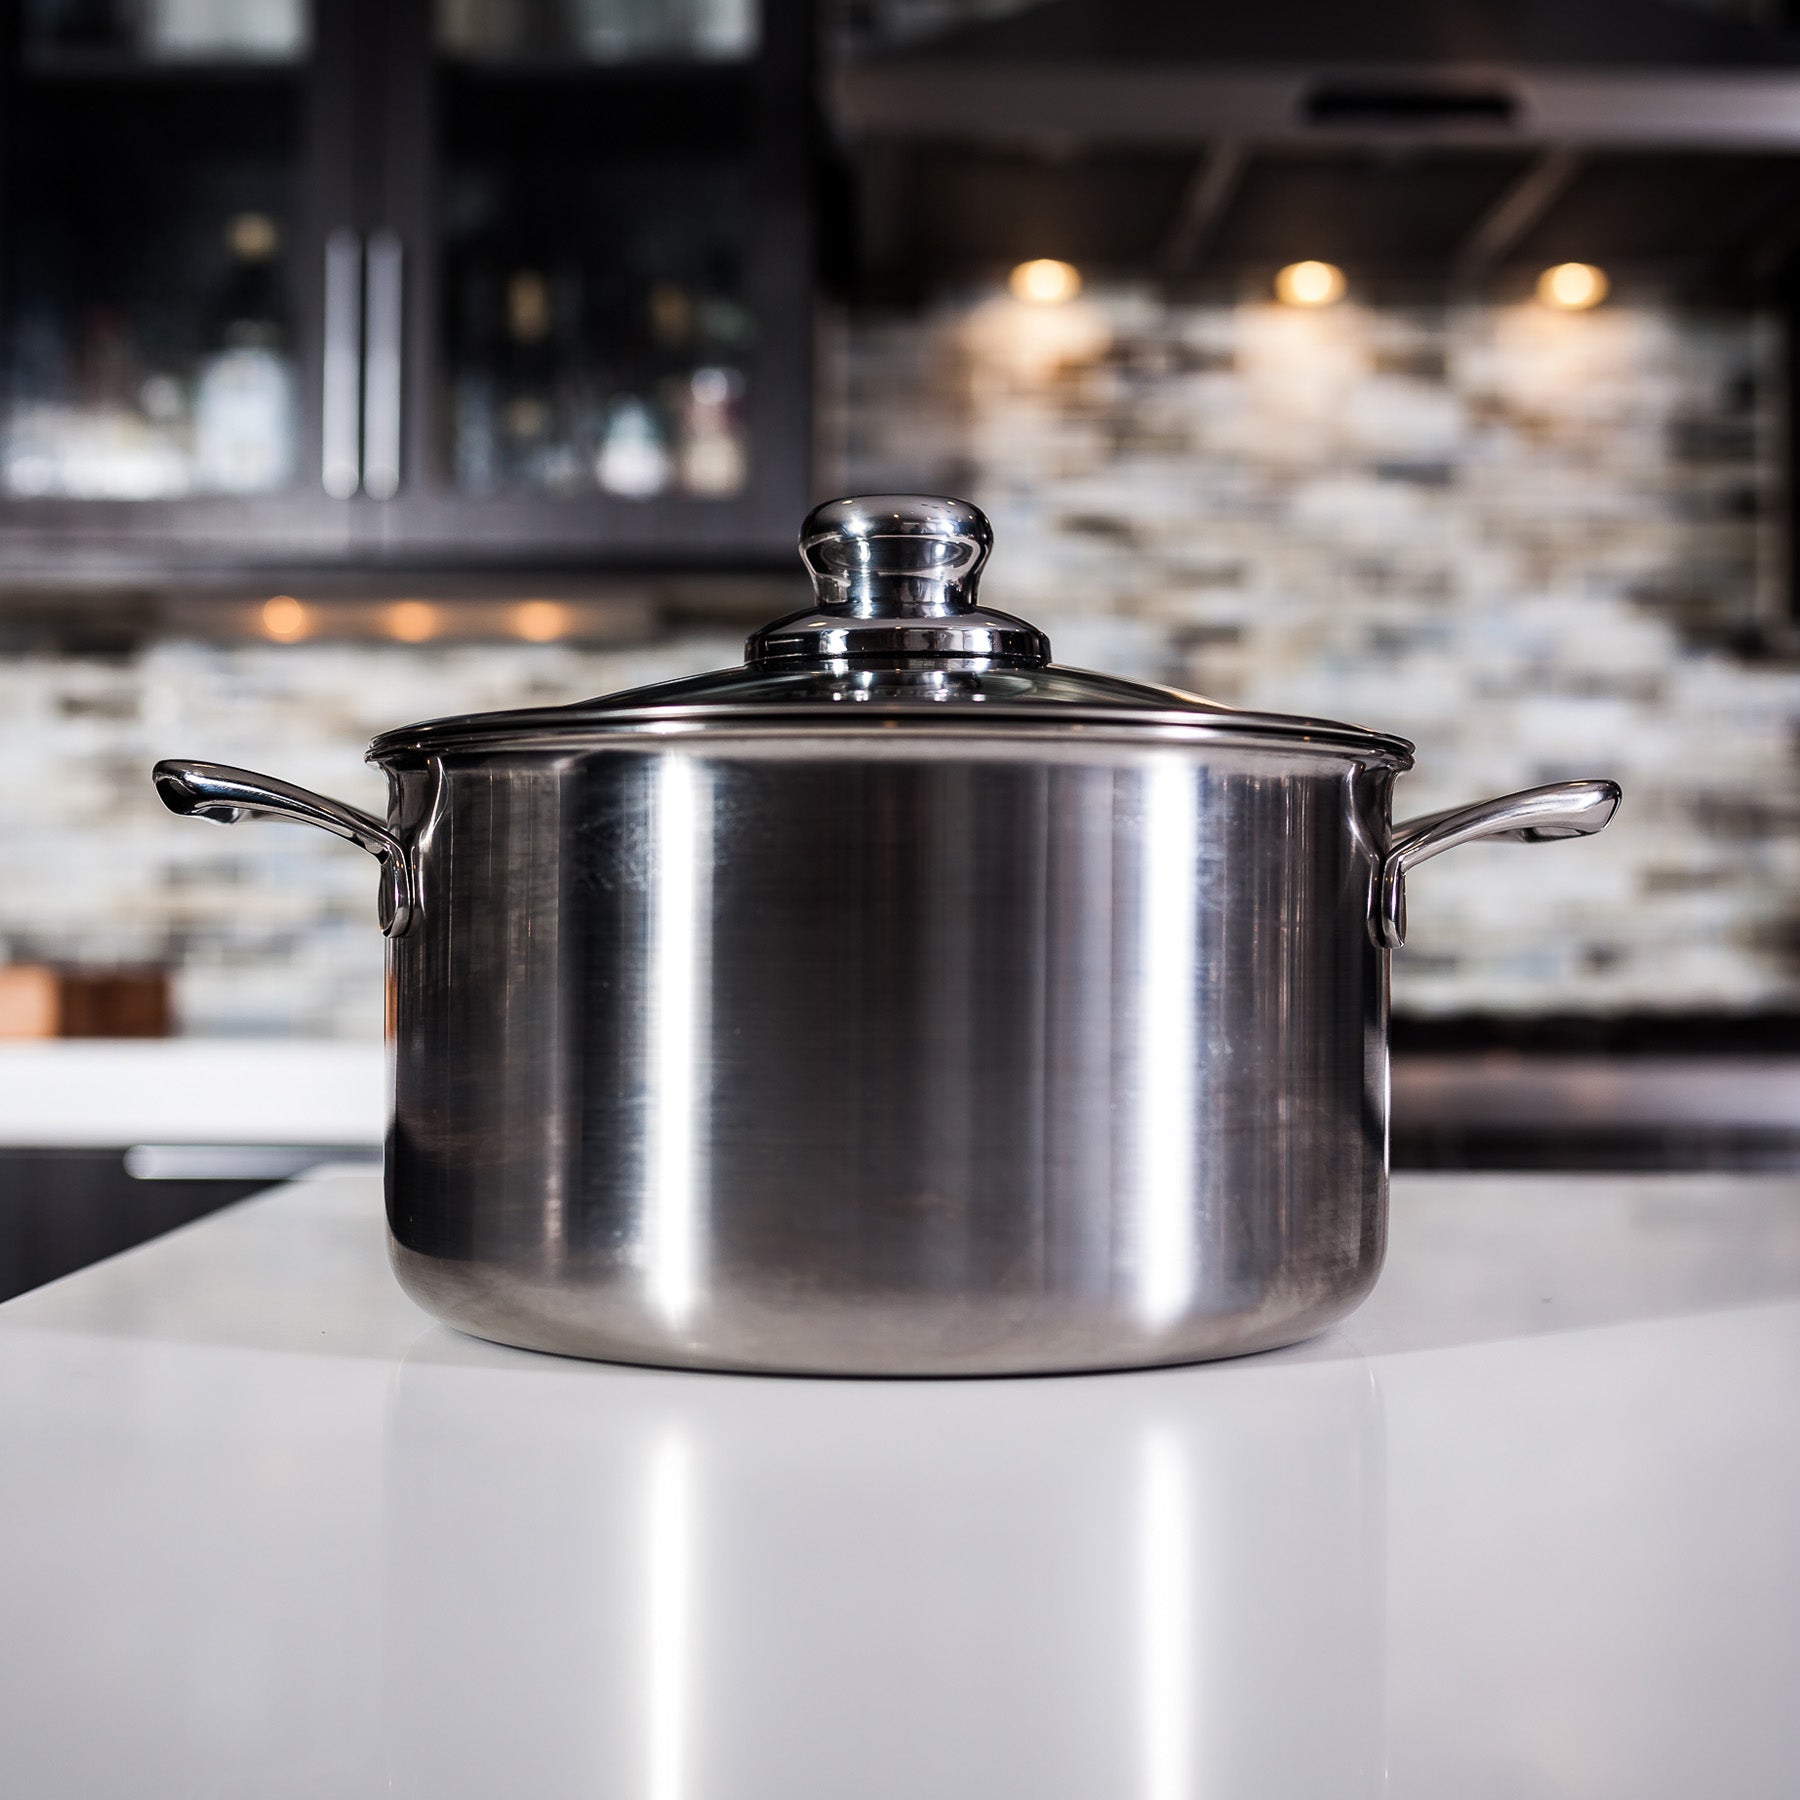 Premium Clad 6.3 qt Dutch Oven with Glass Lid - Induction in use on kitchen counter